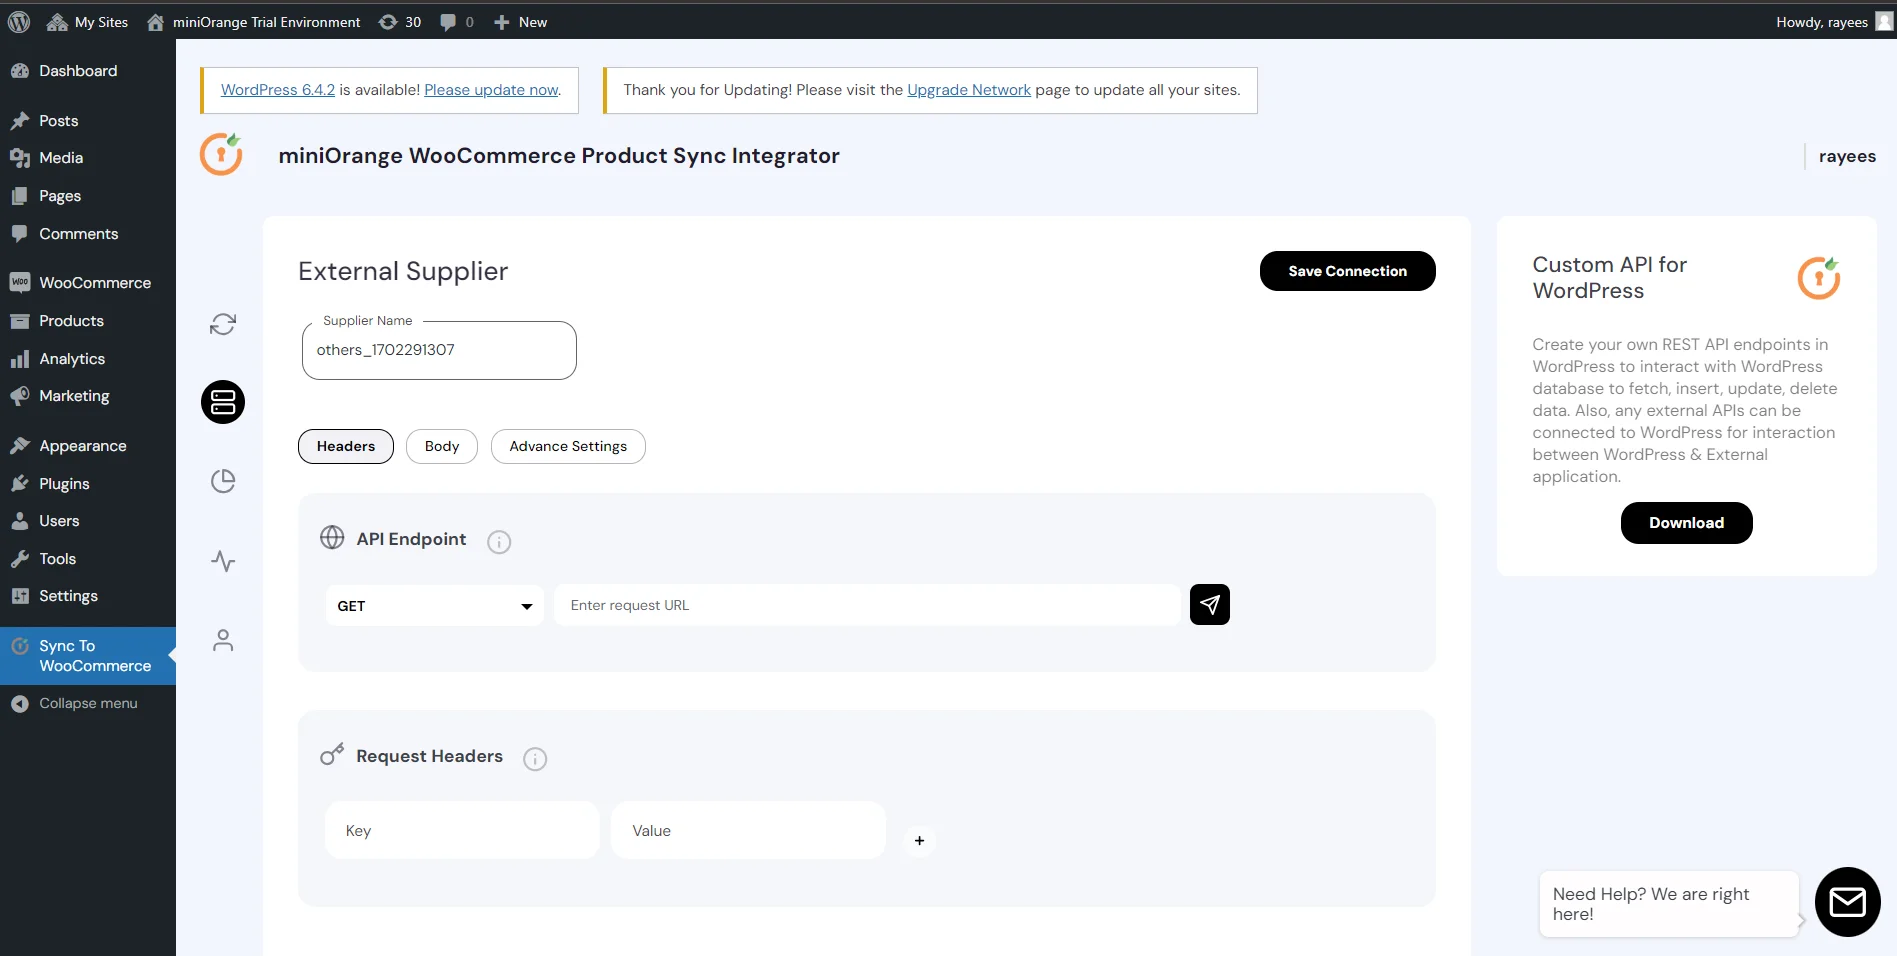 Configure WooCommerce Product Sync - Header data and API endpoint